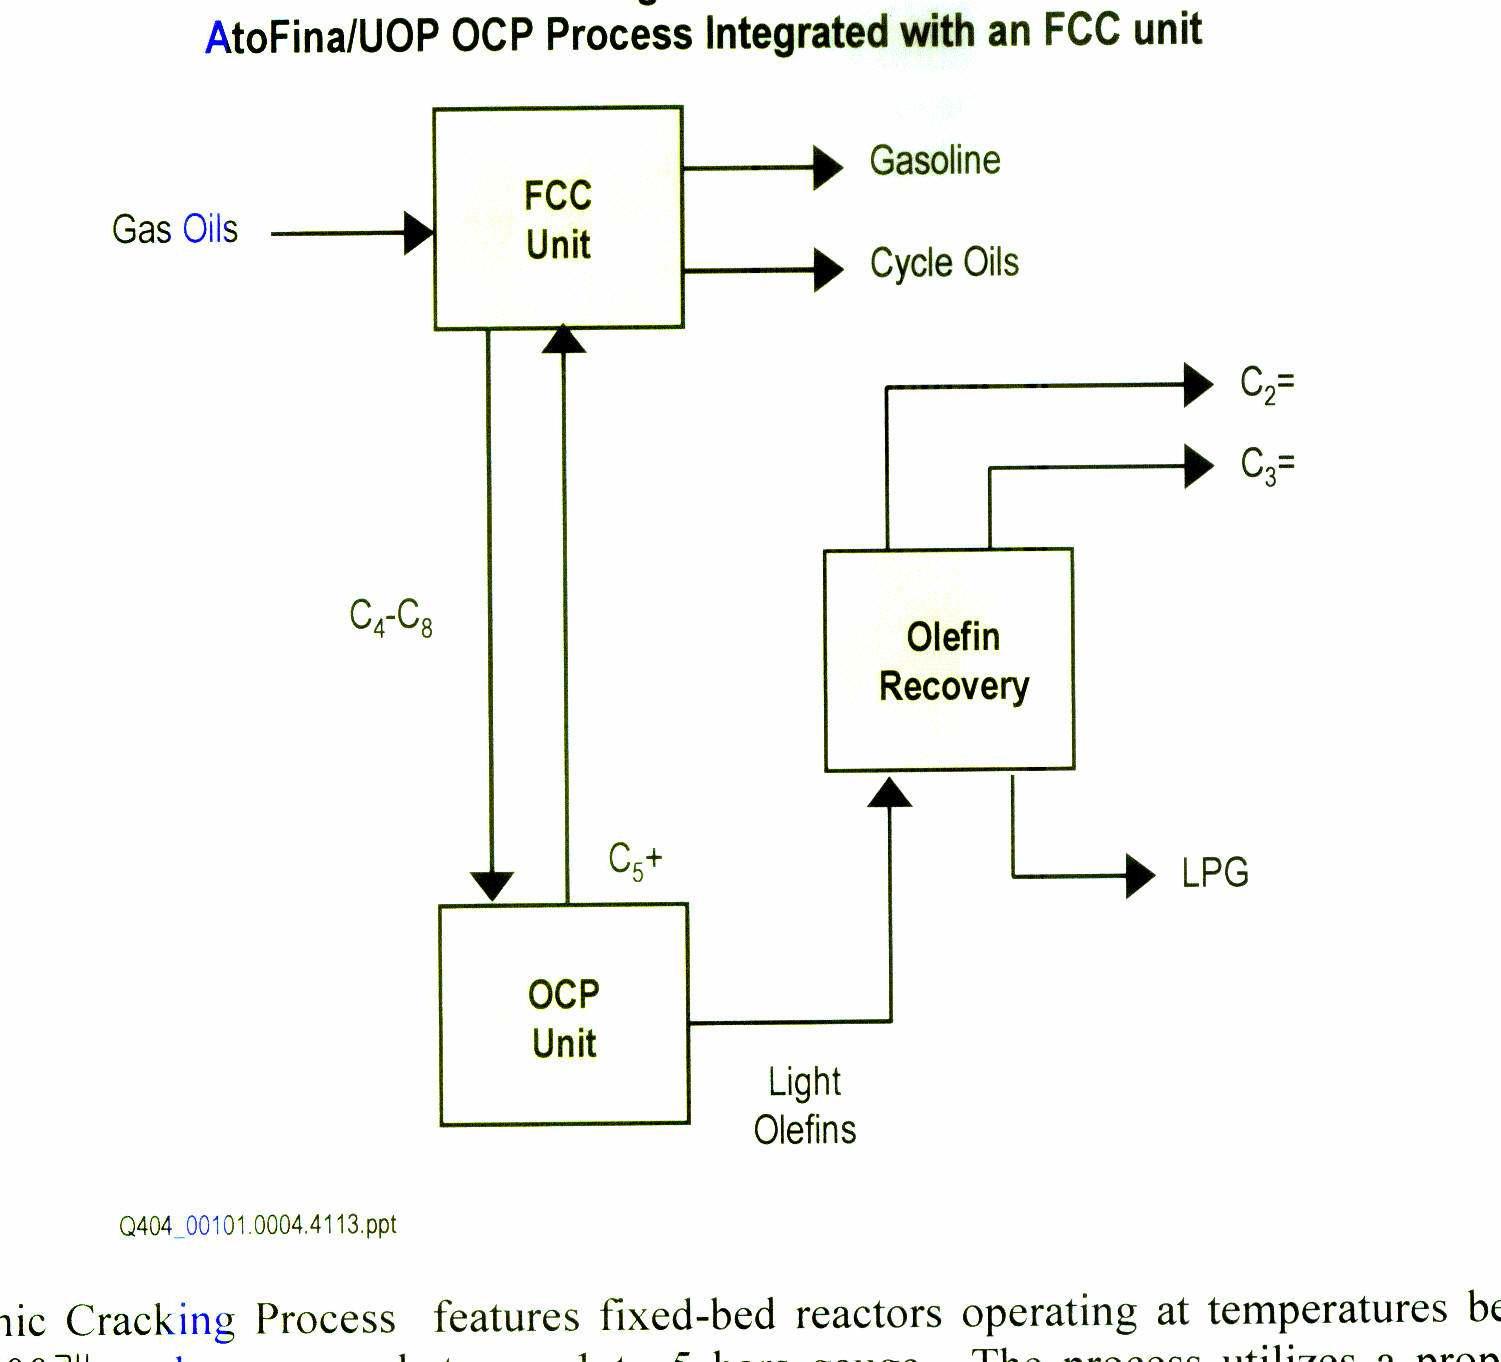 OCP process integrated with FCC unit